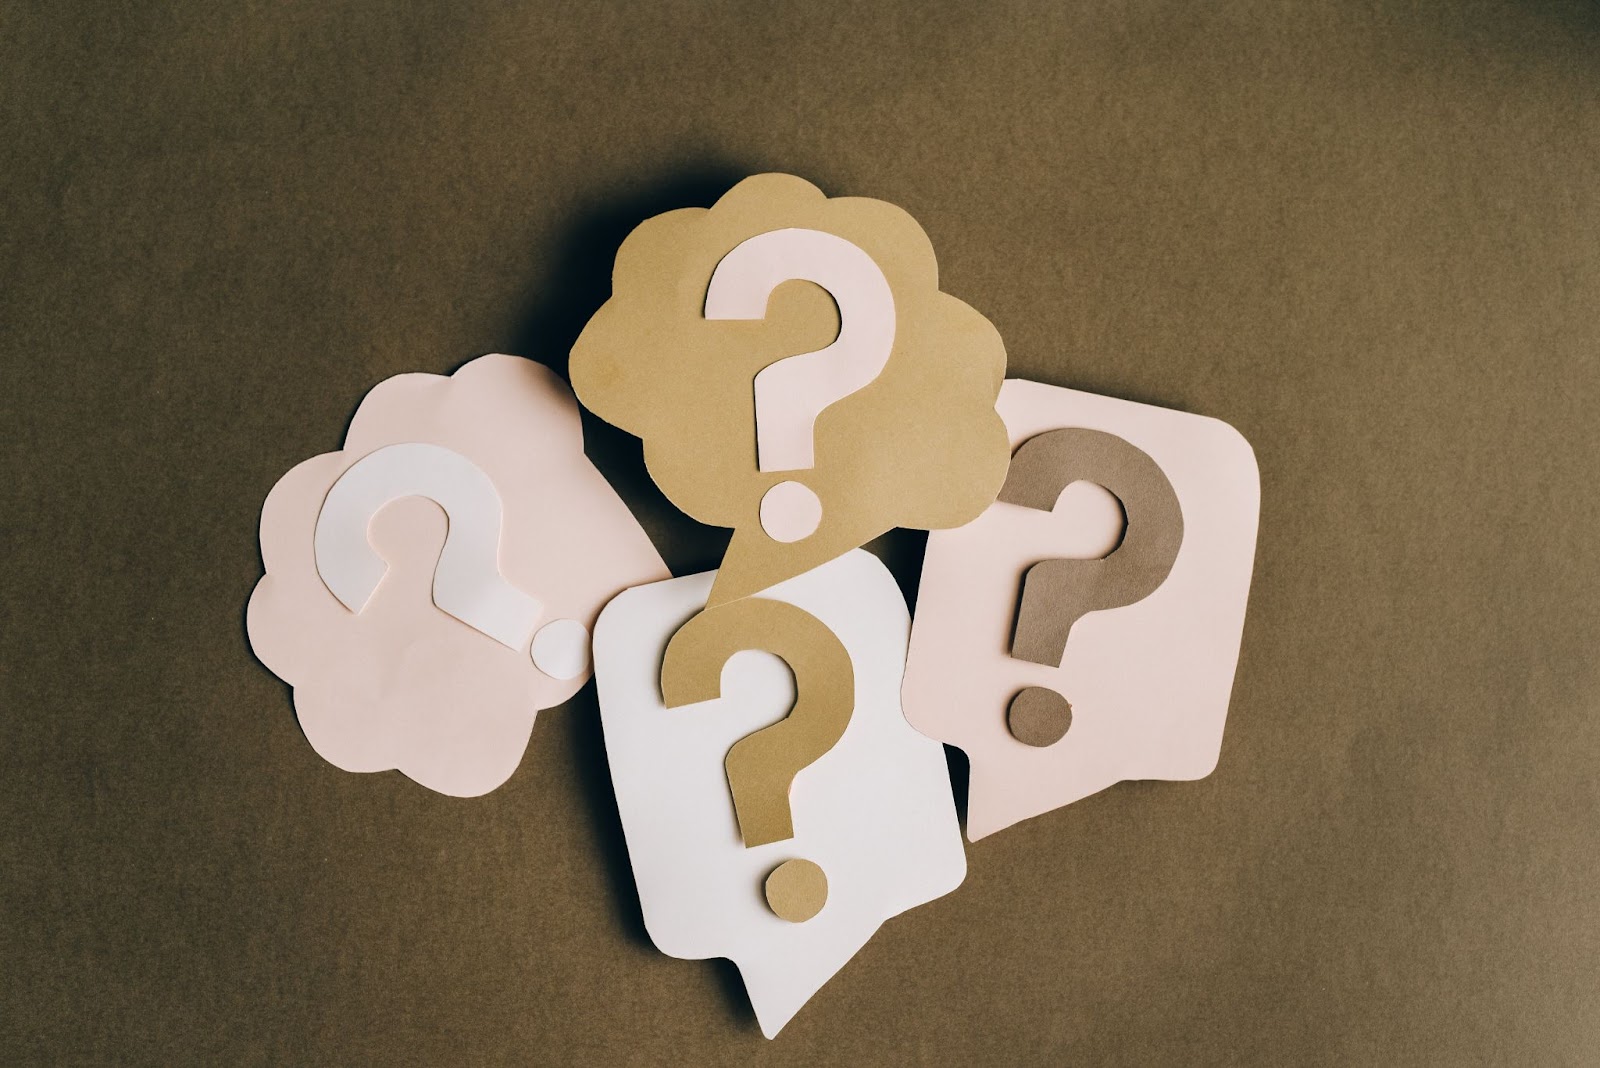 Several cardboard cutouts of question marks